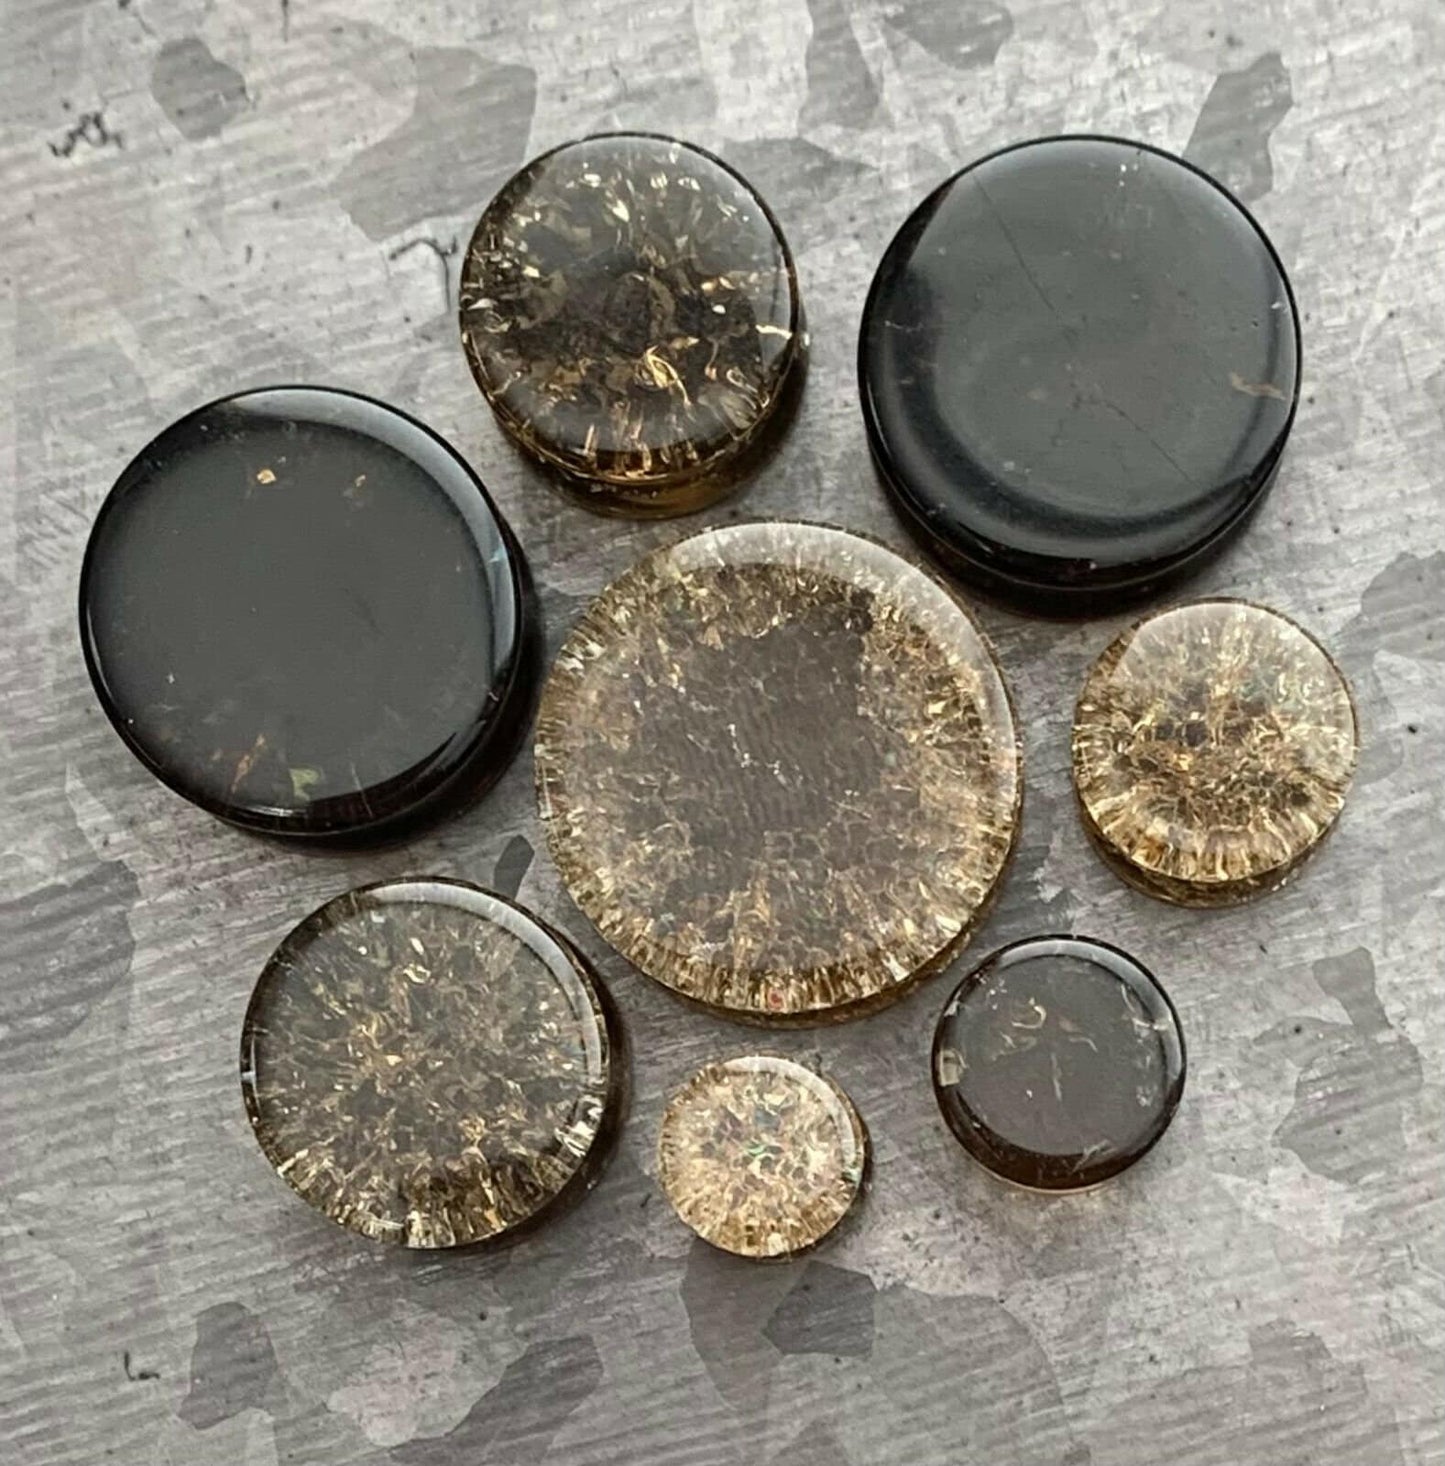 PAIR of Stunning Cracked Golden Black Glass Double Flare Plugs - Gauges 0g (8mm) through 7/8" (22mm) available!